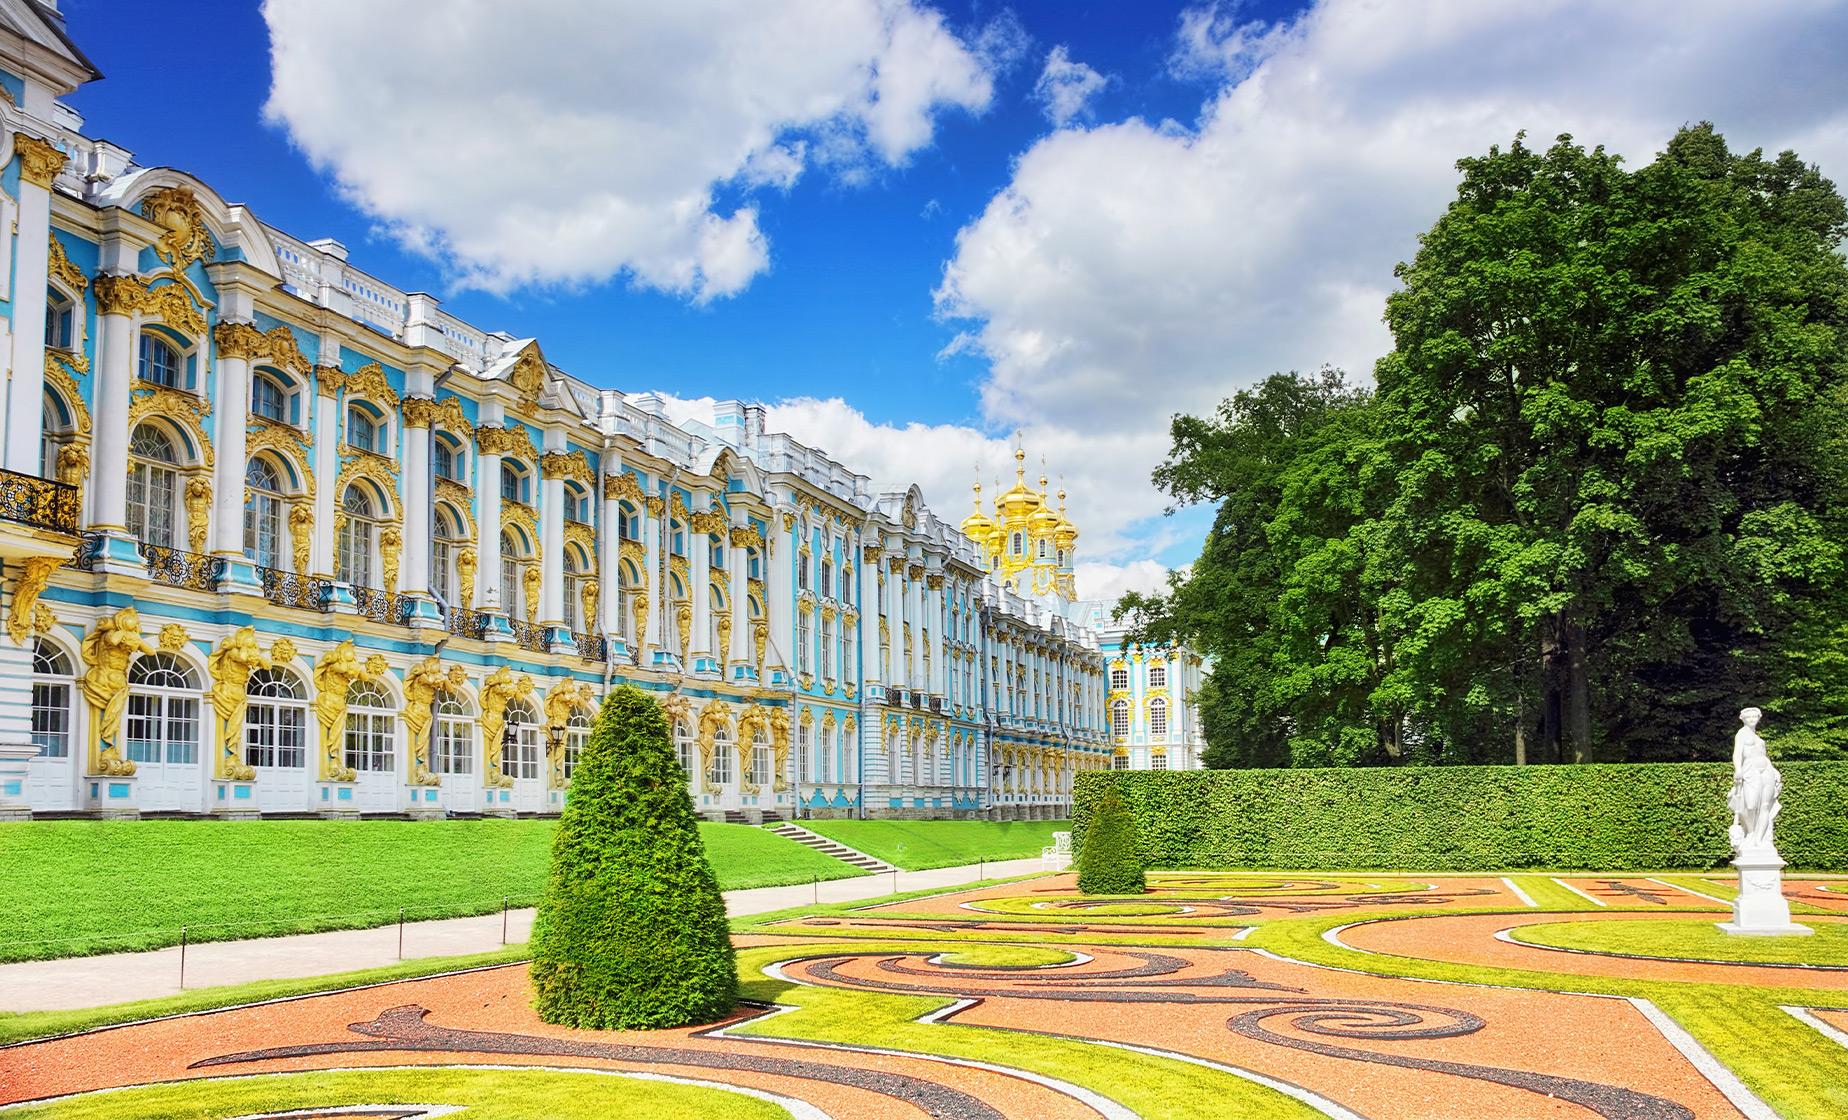 Private Catherine's Palace in Pushkin Tour from St. Petersburg (Visas Included)